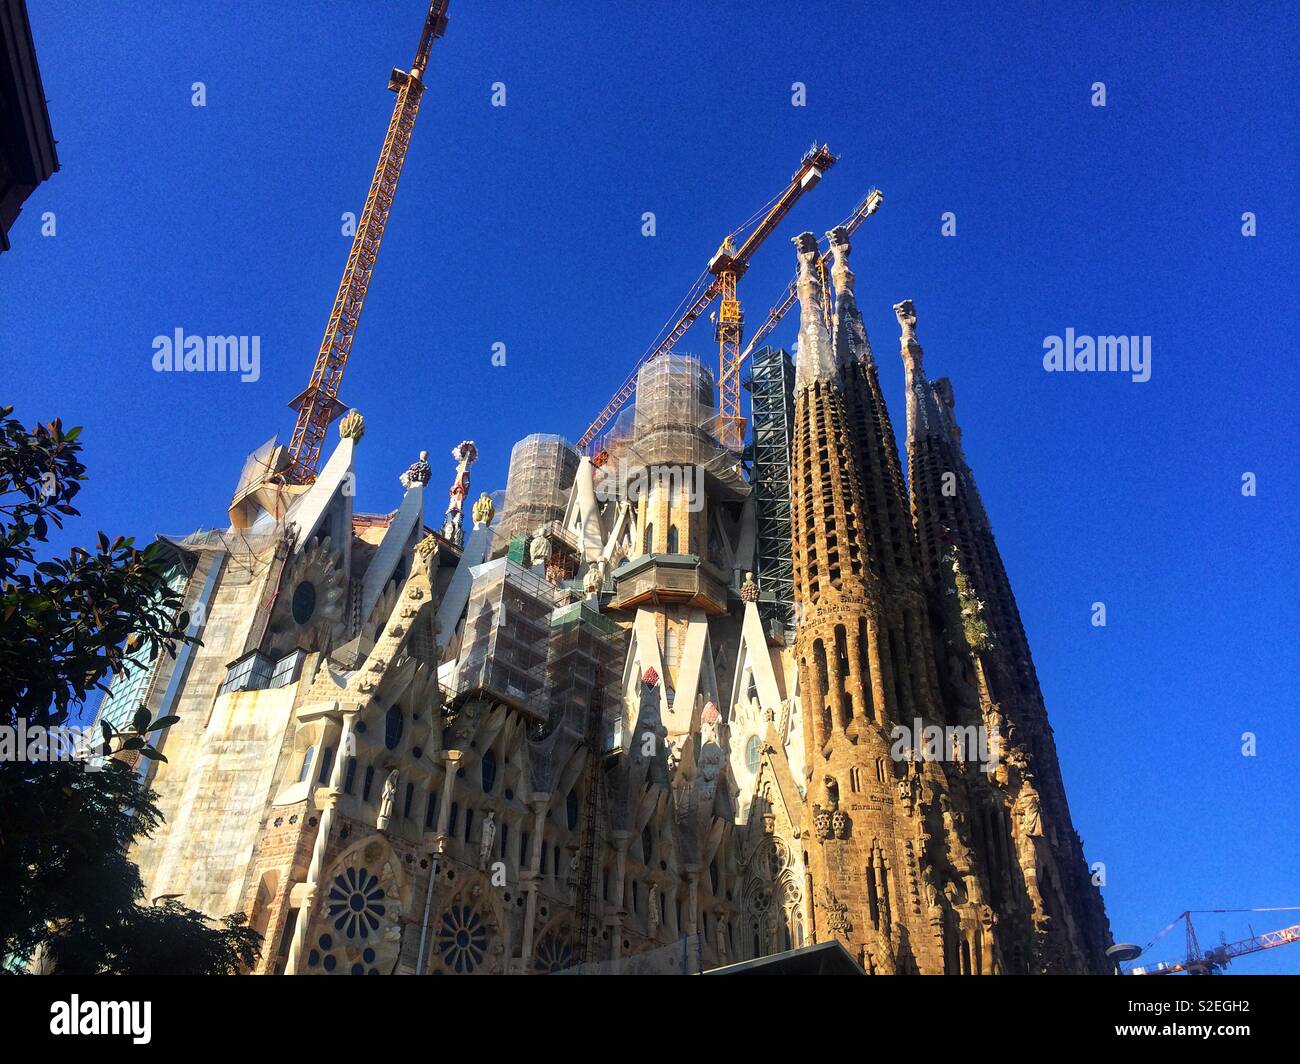 Sagrada Familia basilica architectural details on exterior of building and steeples while under construction with cranes Stock Photo